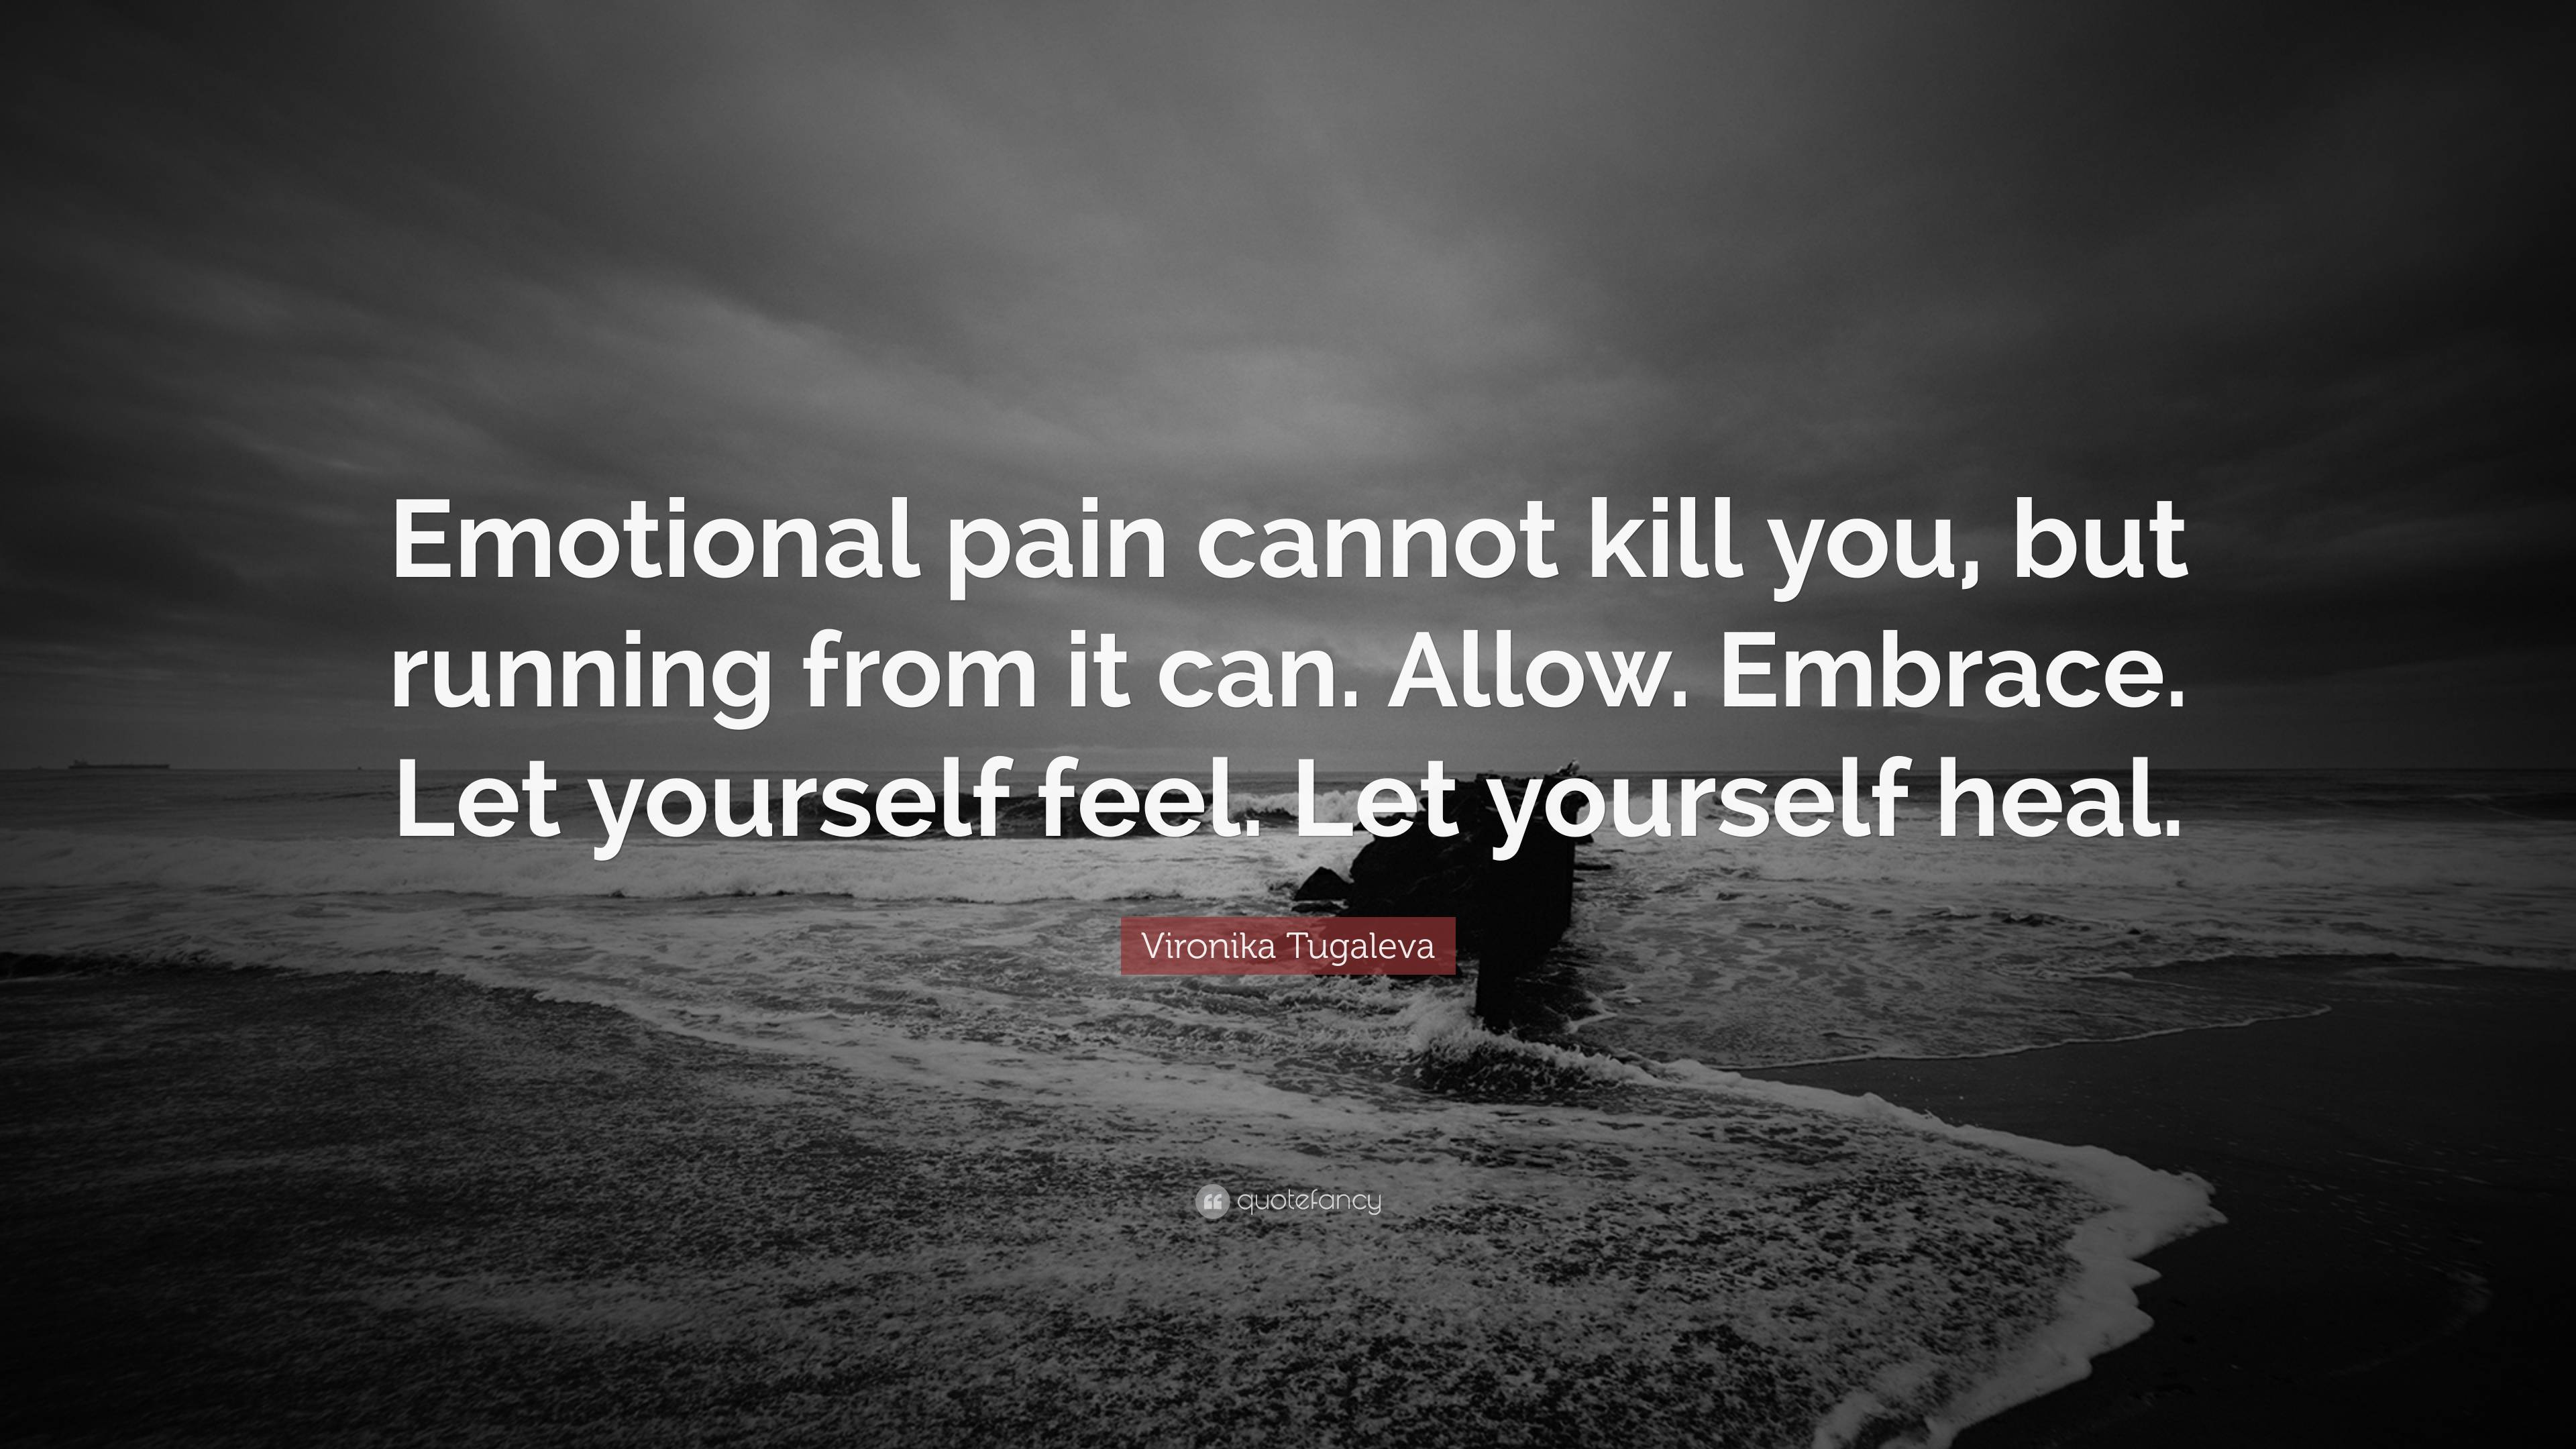 Vironika Tugaleva Quote: “Emotional pain cannot kill you, but running ...